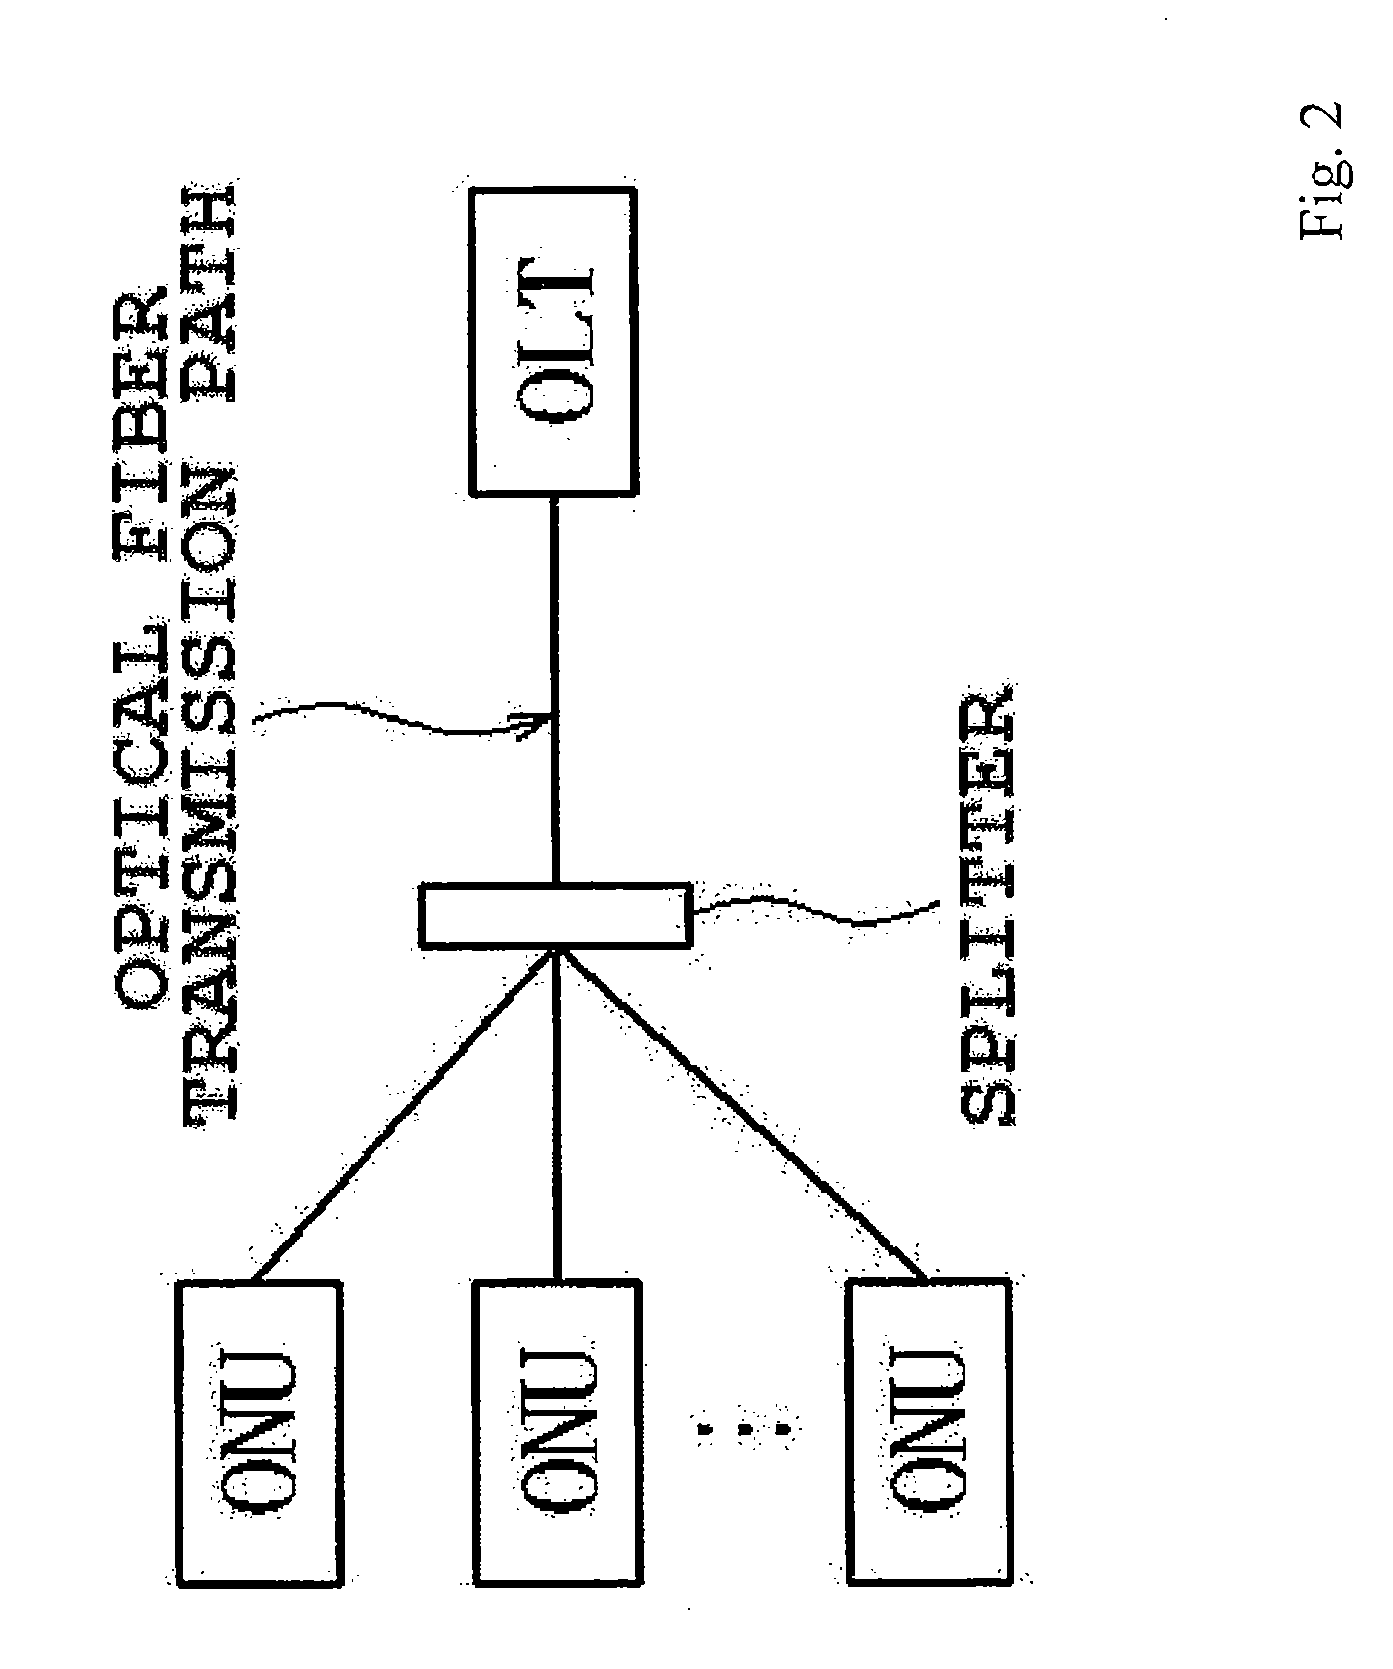 Optical line terminal and optical network unit